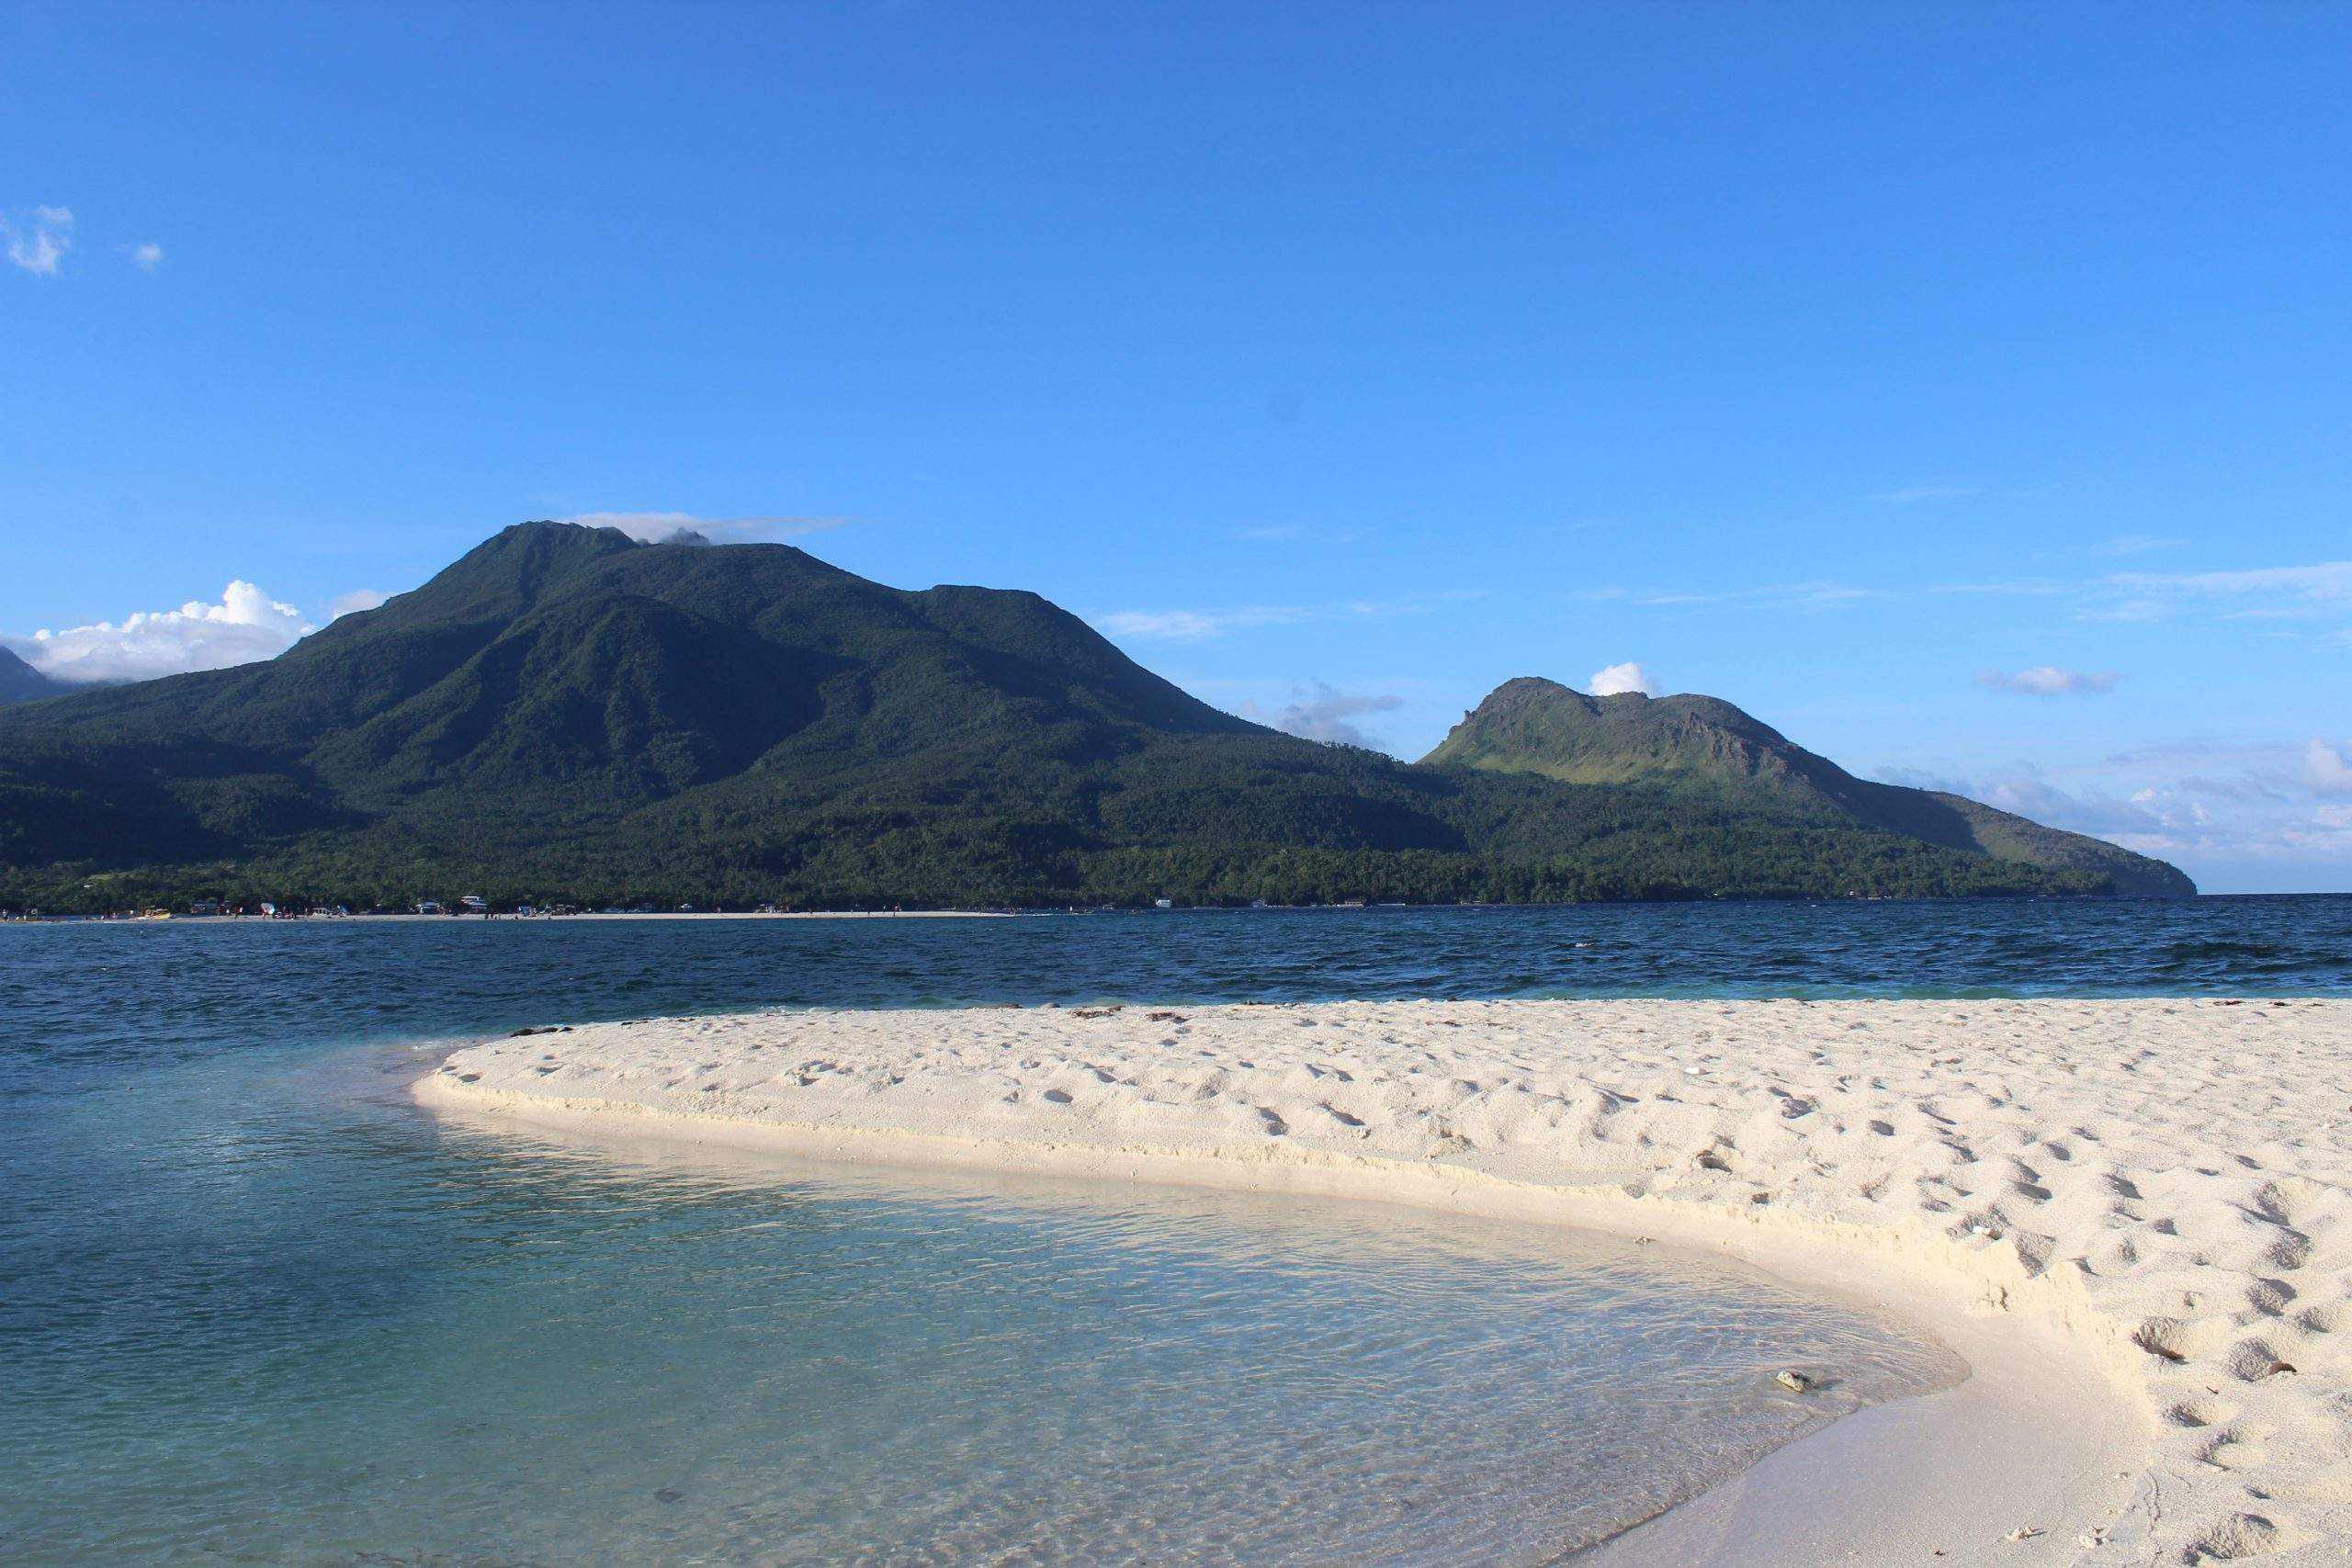 Camiguin Province: The Island Born of Fire and Its Hidden Gems